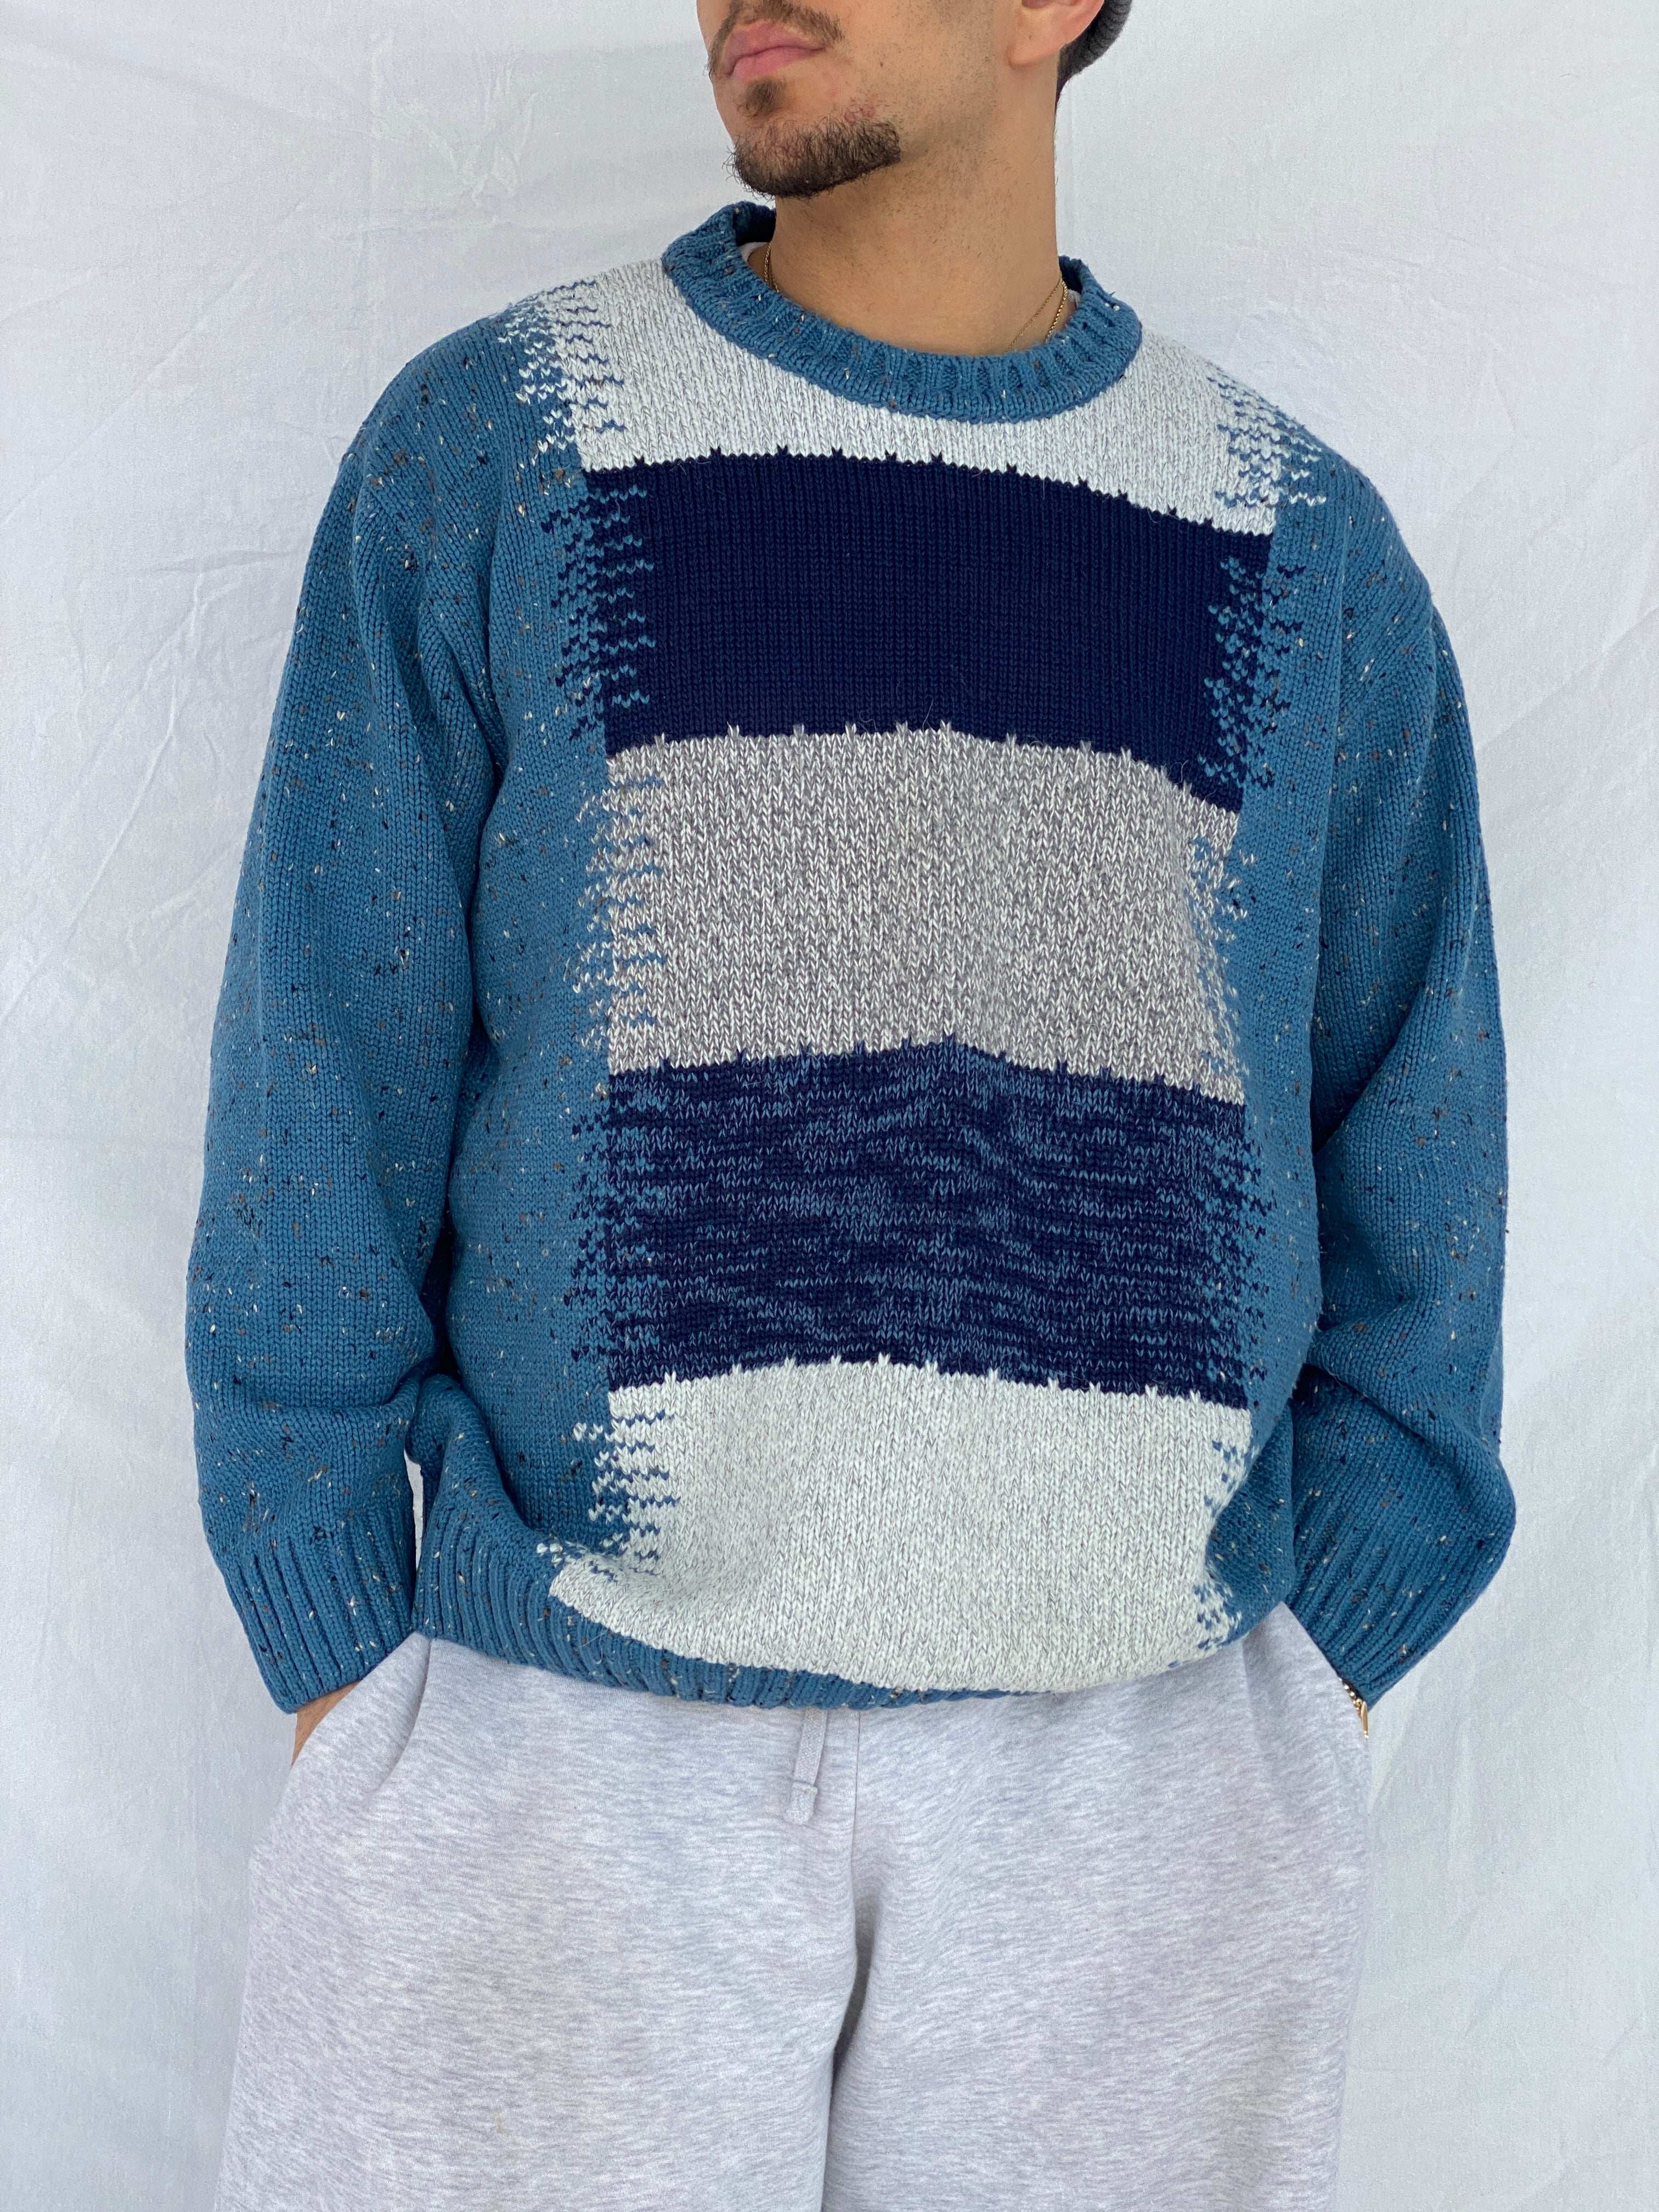 Sementa Collection‘s Blue Knitted Sweater - Size L - Balagan Vintage Sweater 80s, 90s, Abdullah, knitted sweater, vintage sweater, winter